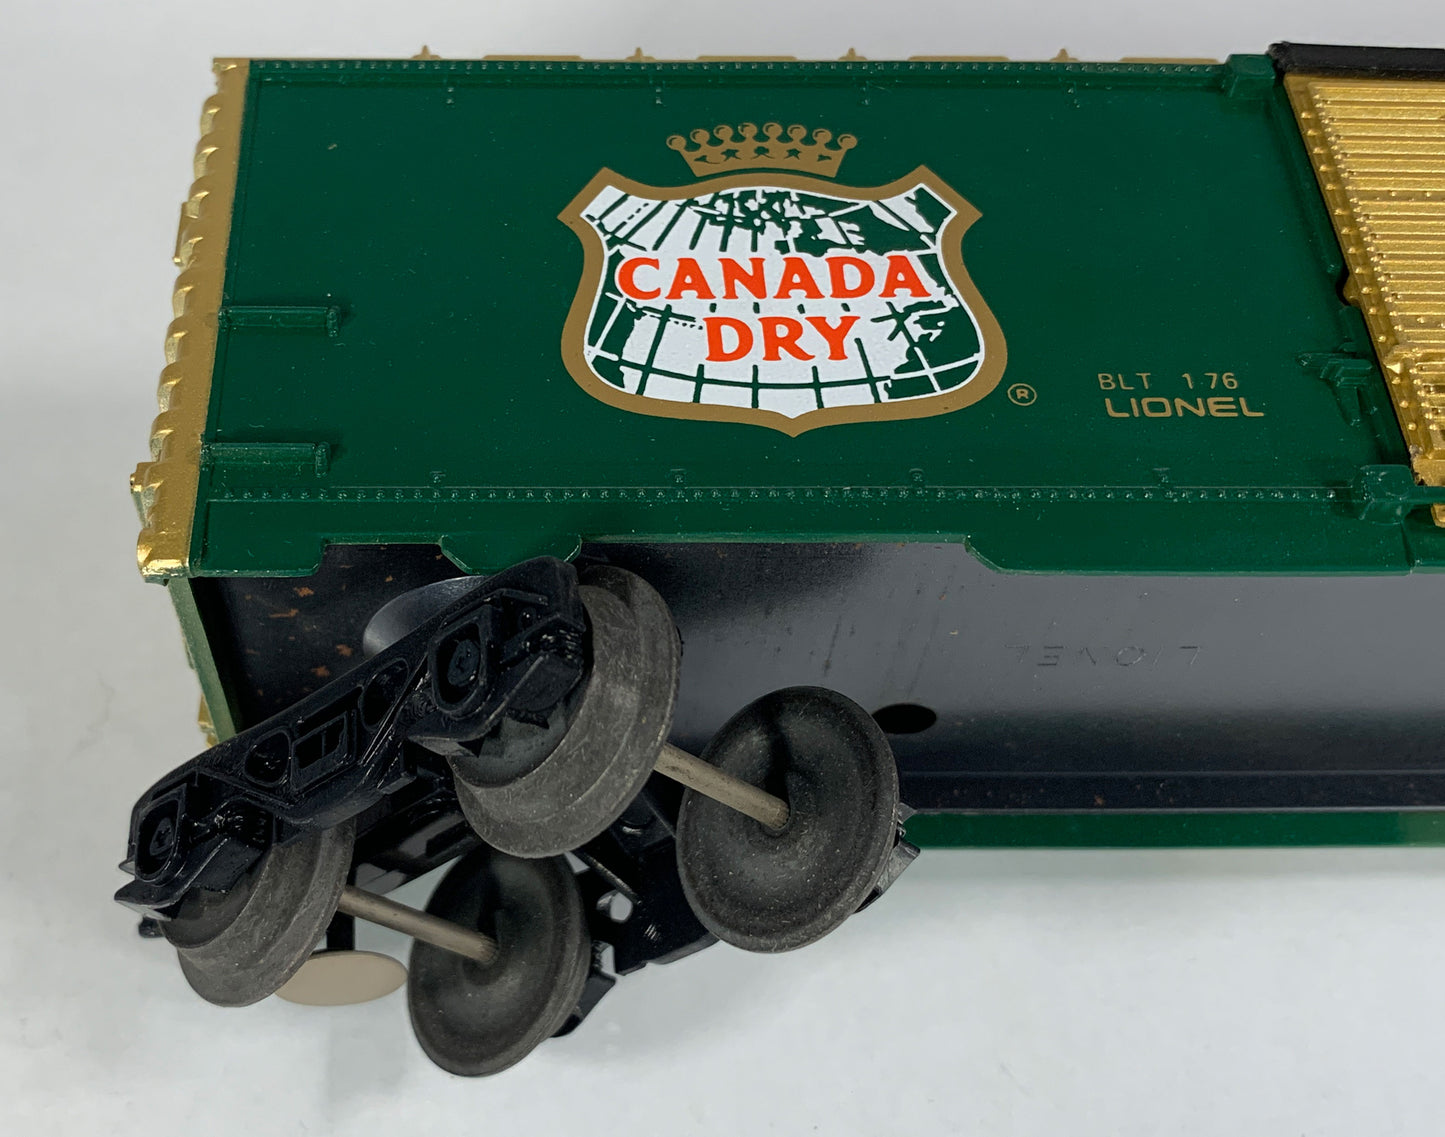 LIONEL • O GAUGE • 1976 Canada Dry Ginger Ale Boxcar 6-7802 • EX COND